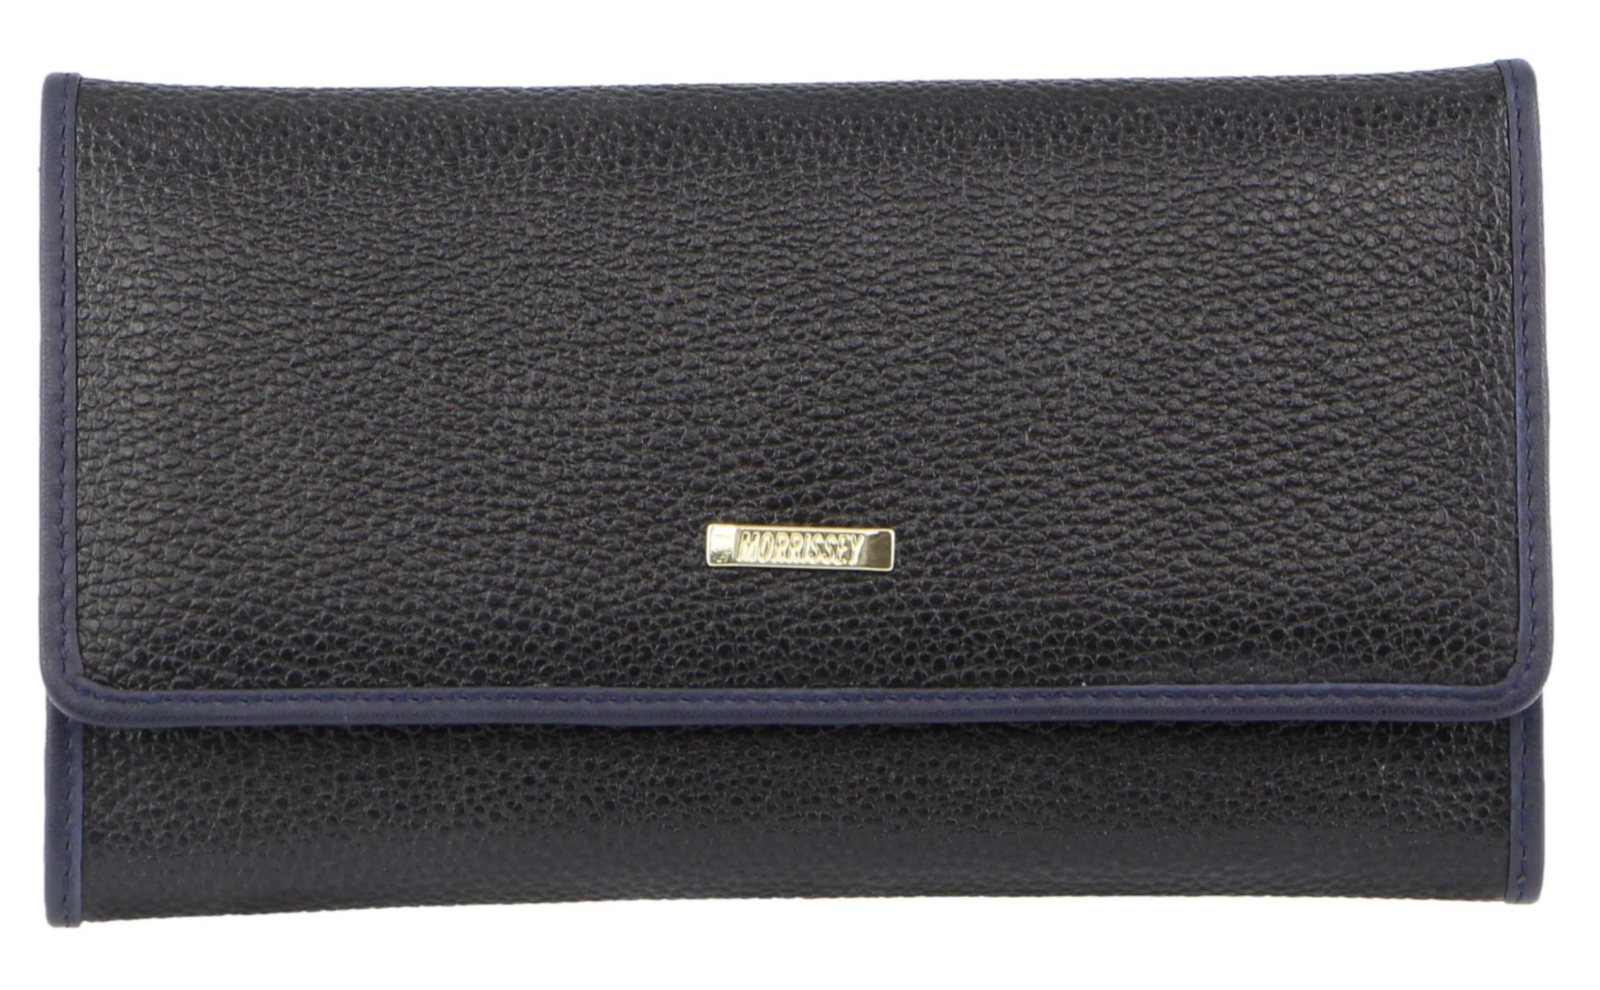 Morrissey Italian Structured Leather Flap Over Ladies Wallet - Black